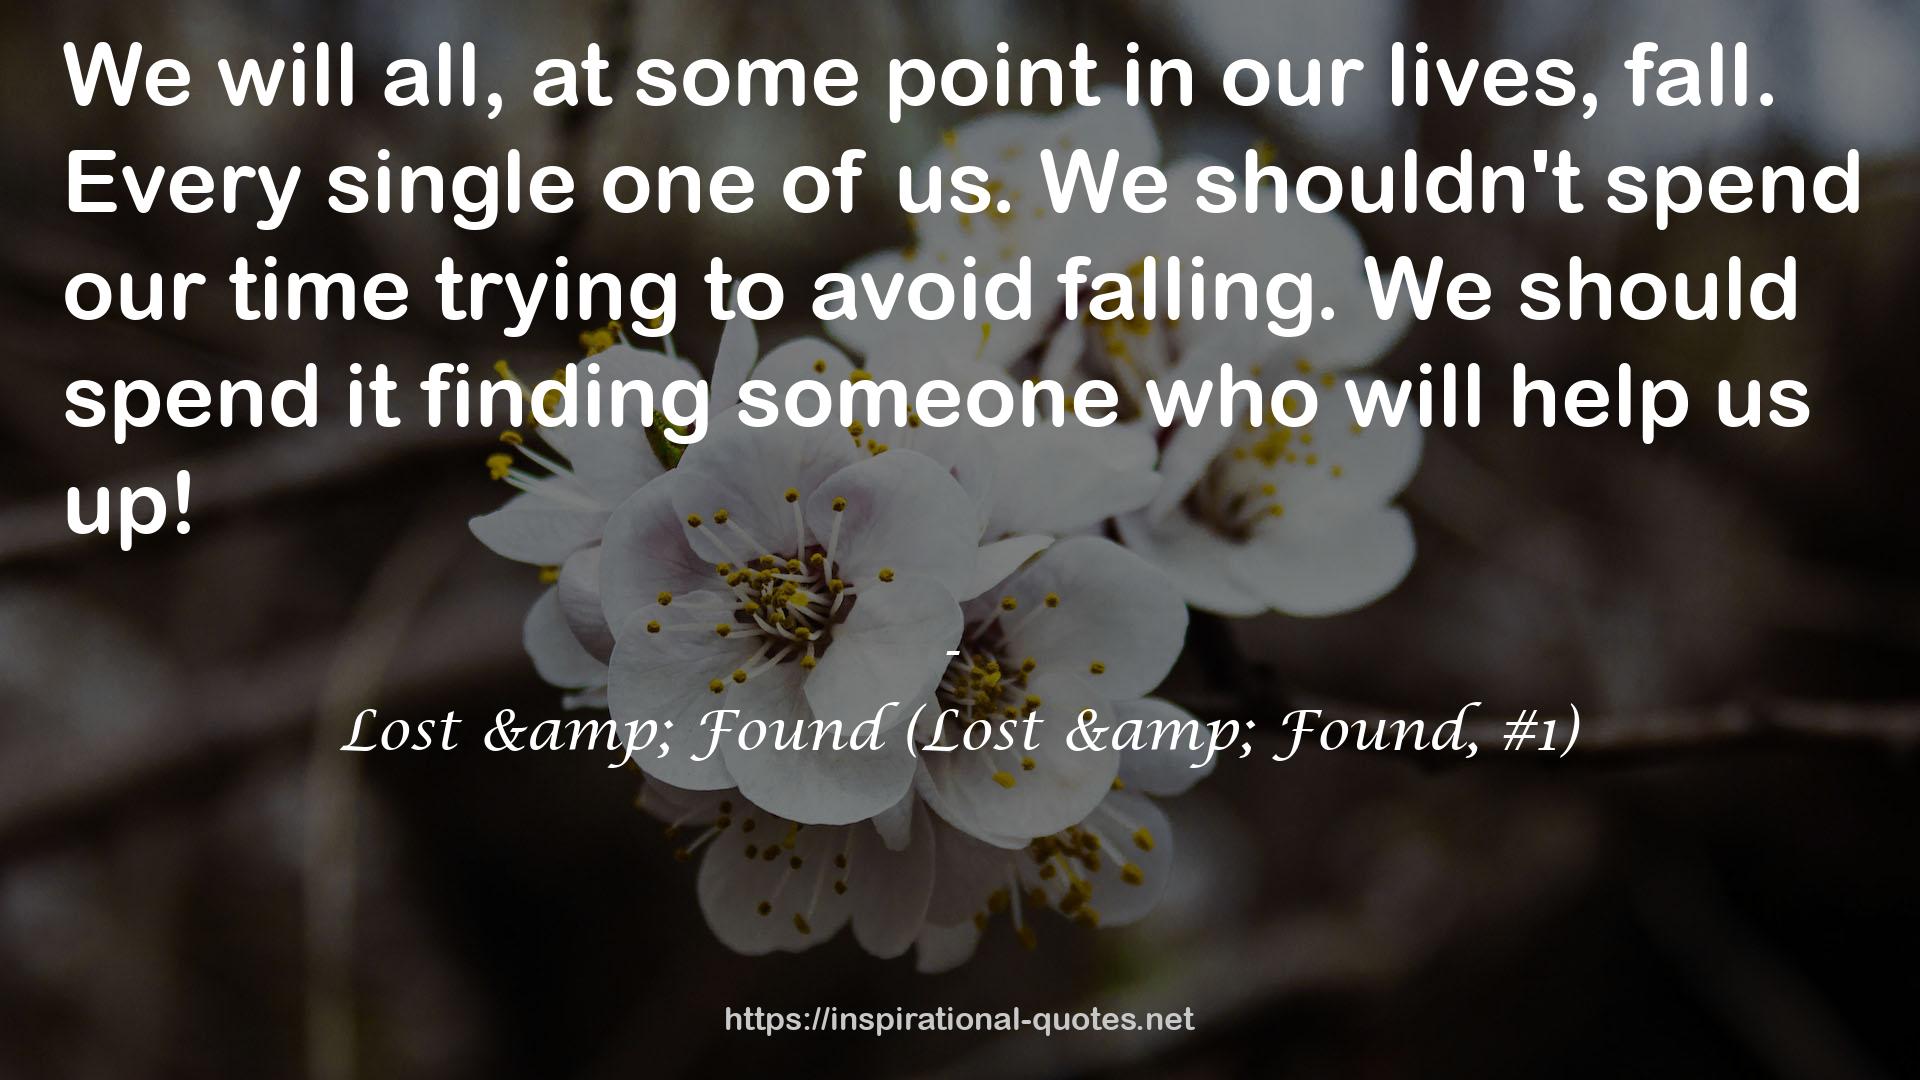 Lost & Found (Lost & Found, #1) QUOTES